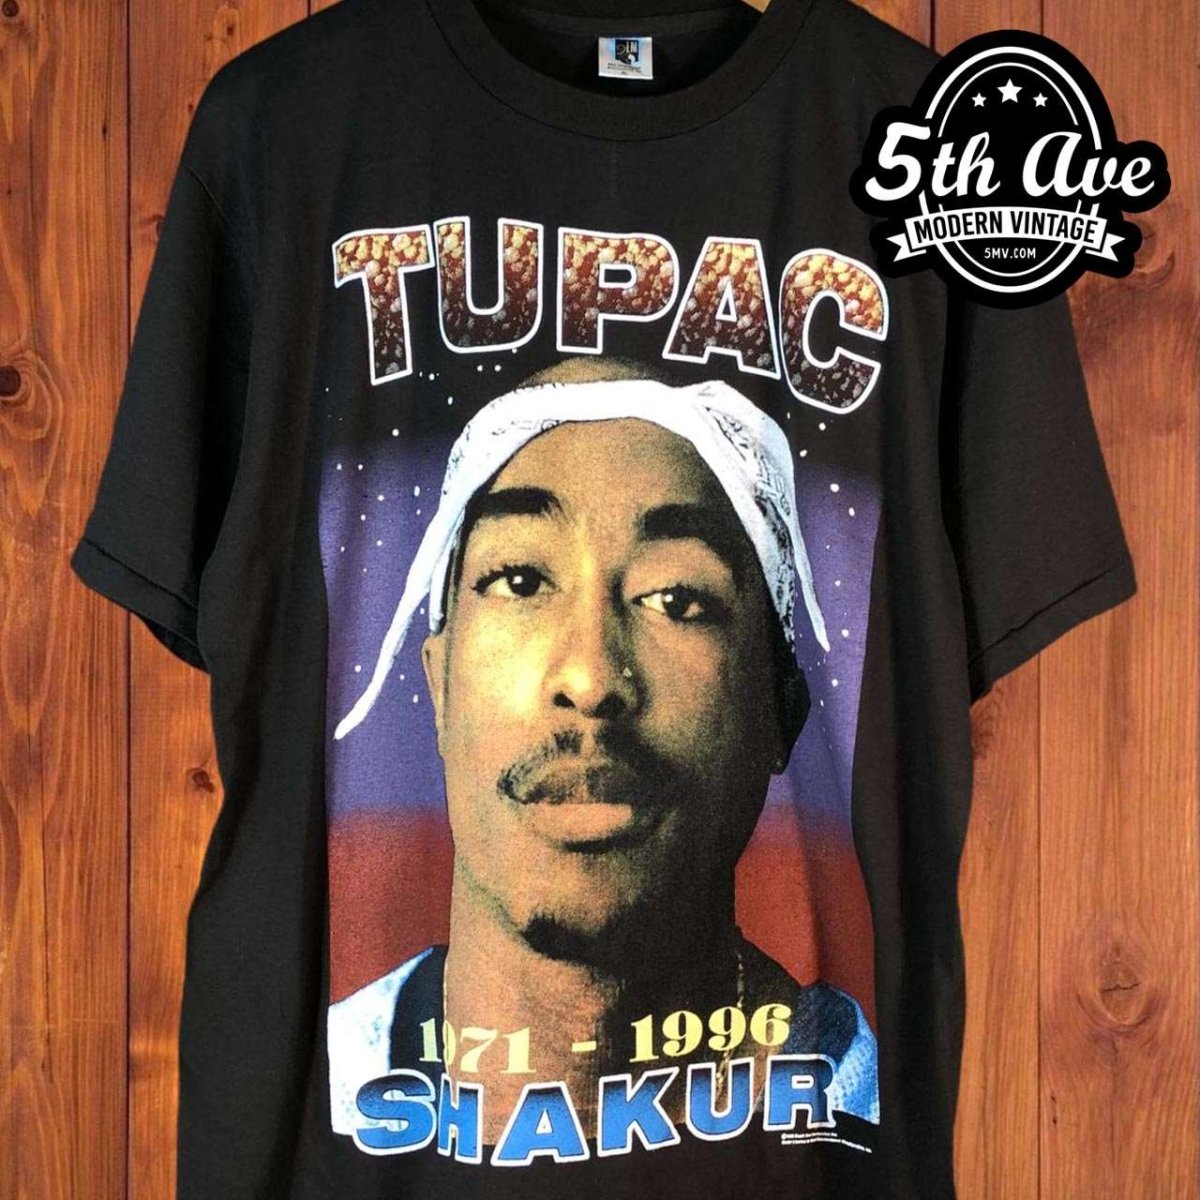 Tupac Shakur Against All Odds - New Vintage T shirt - Vintage Band